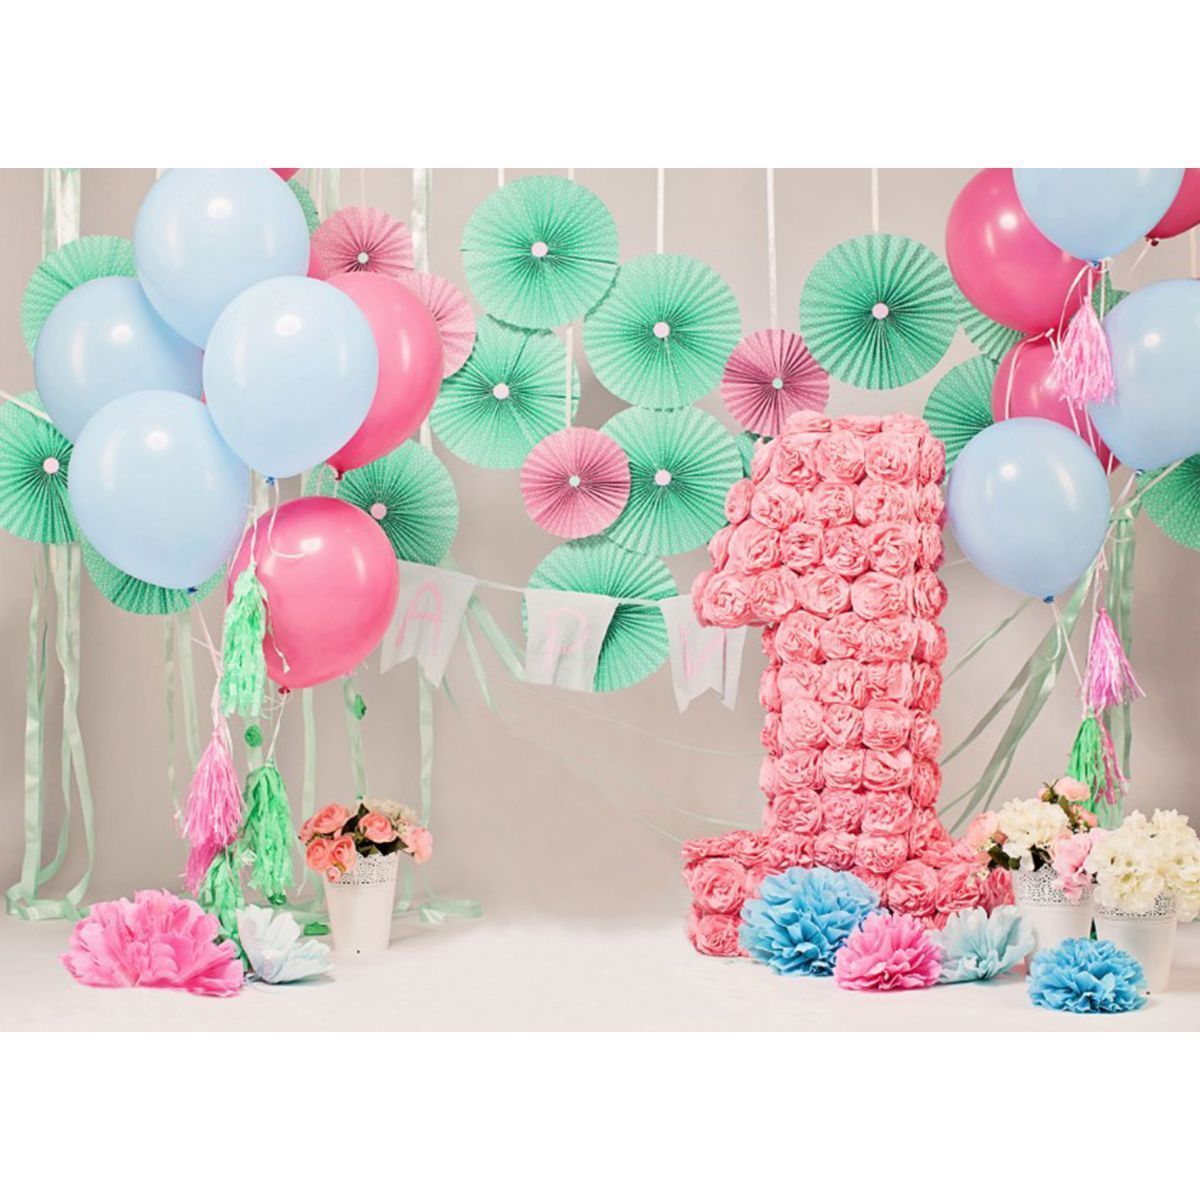 5x7FT-Vinyl-Balloon-One-Year-Old-Party-Photography-Backdrop-Background-Studio-Prop-1449893